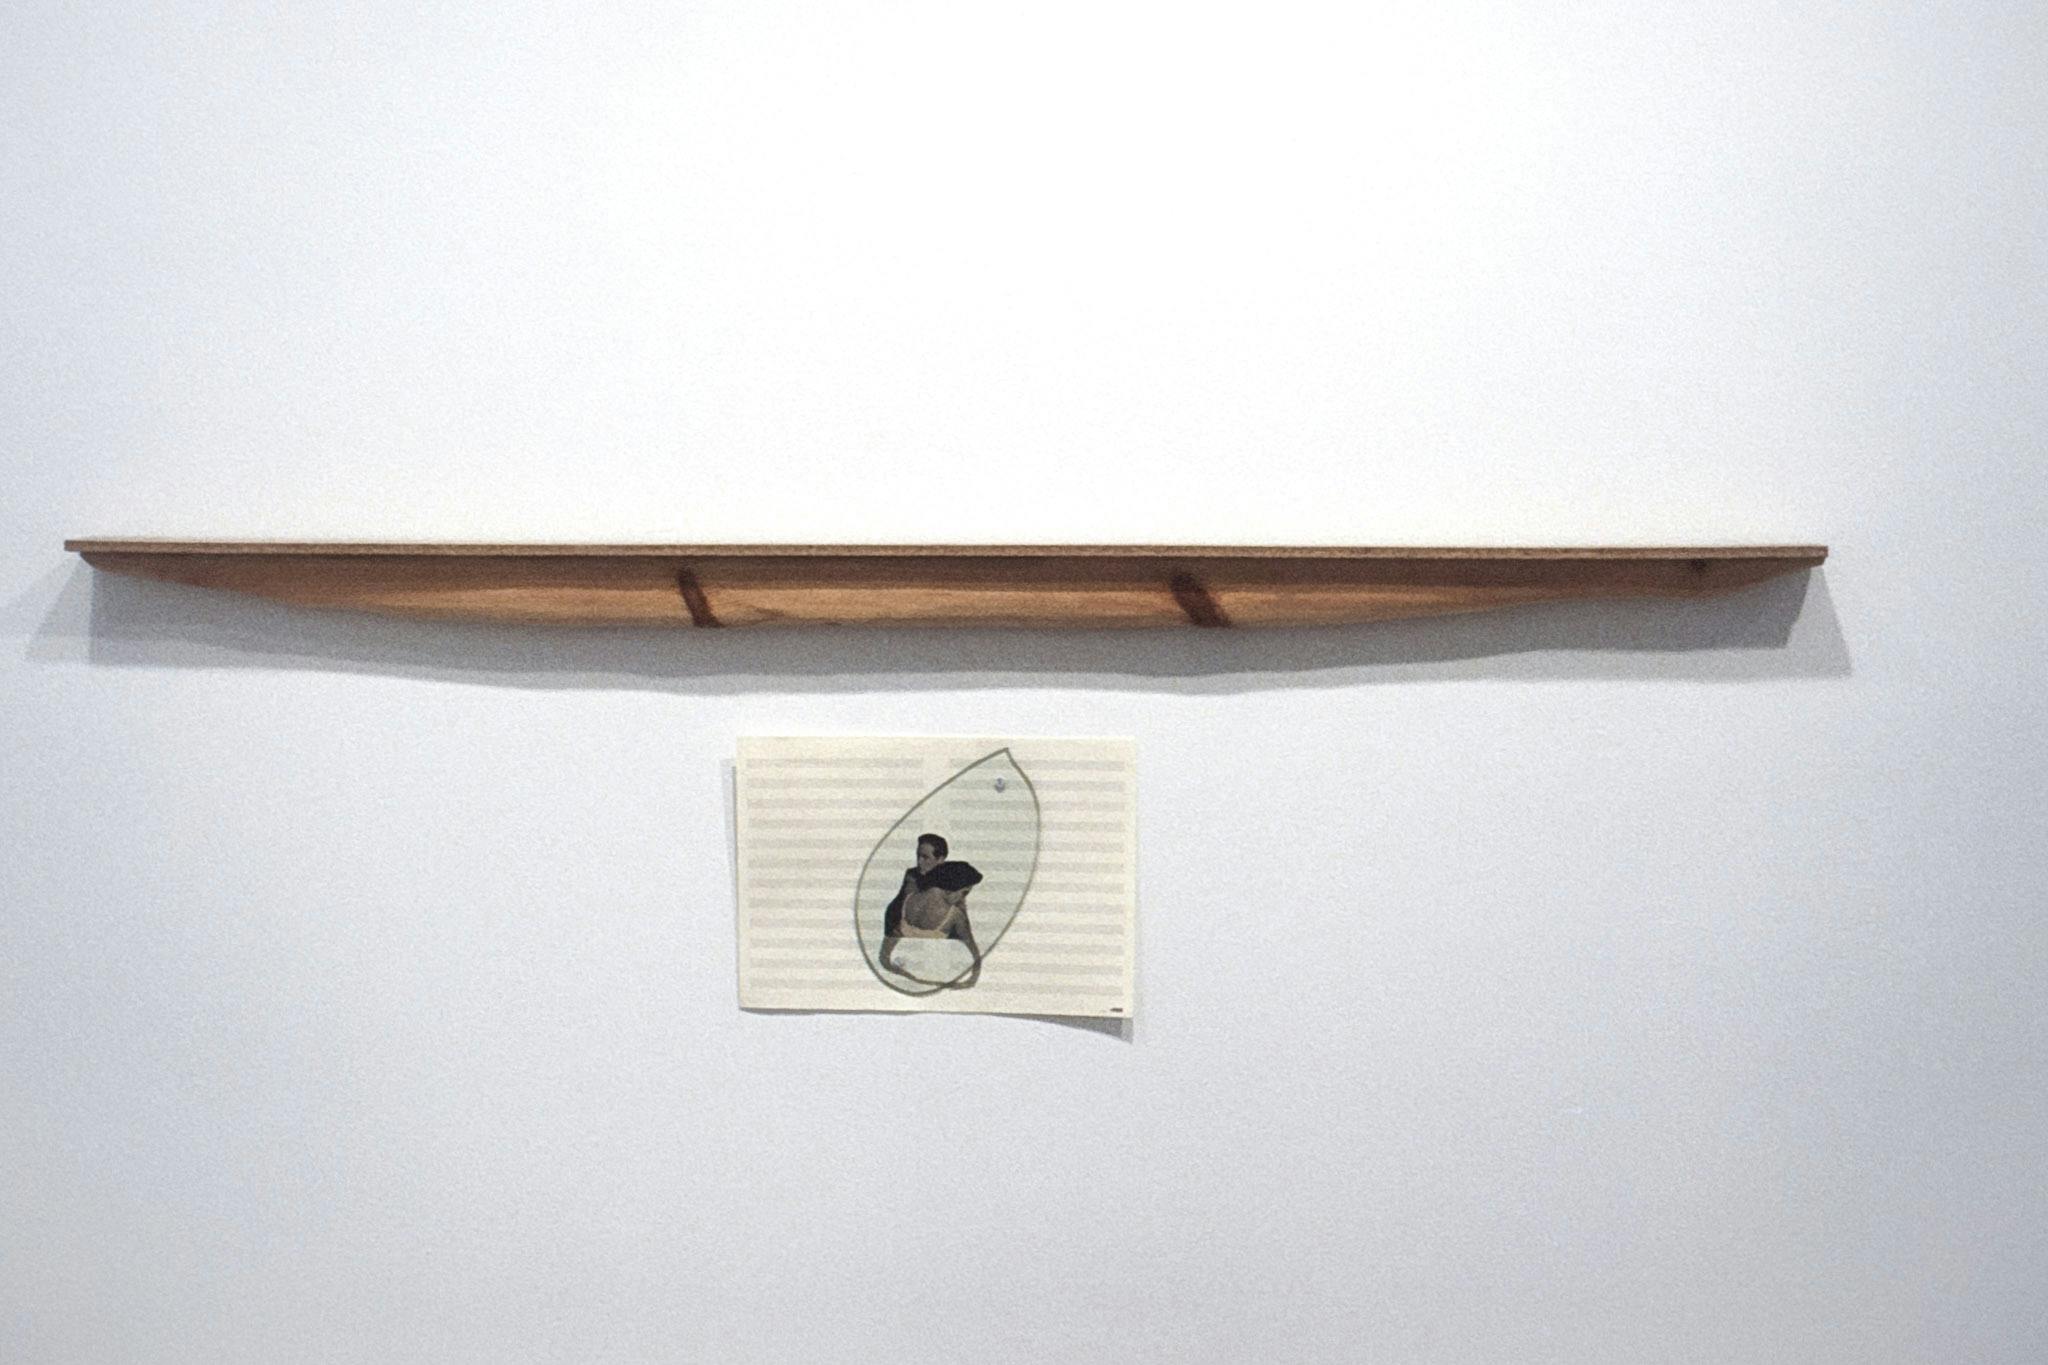 A wooden shelf-like sculpture hangs horizontally on a wall. A drawing of two figures embracing made on blank musical notation paper is pinned to the wall beneath it. 